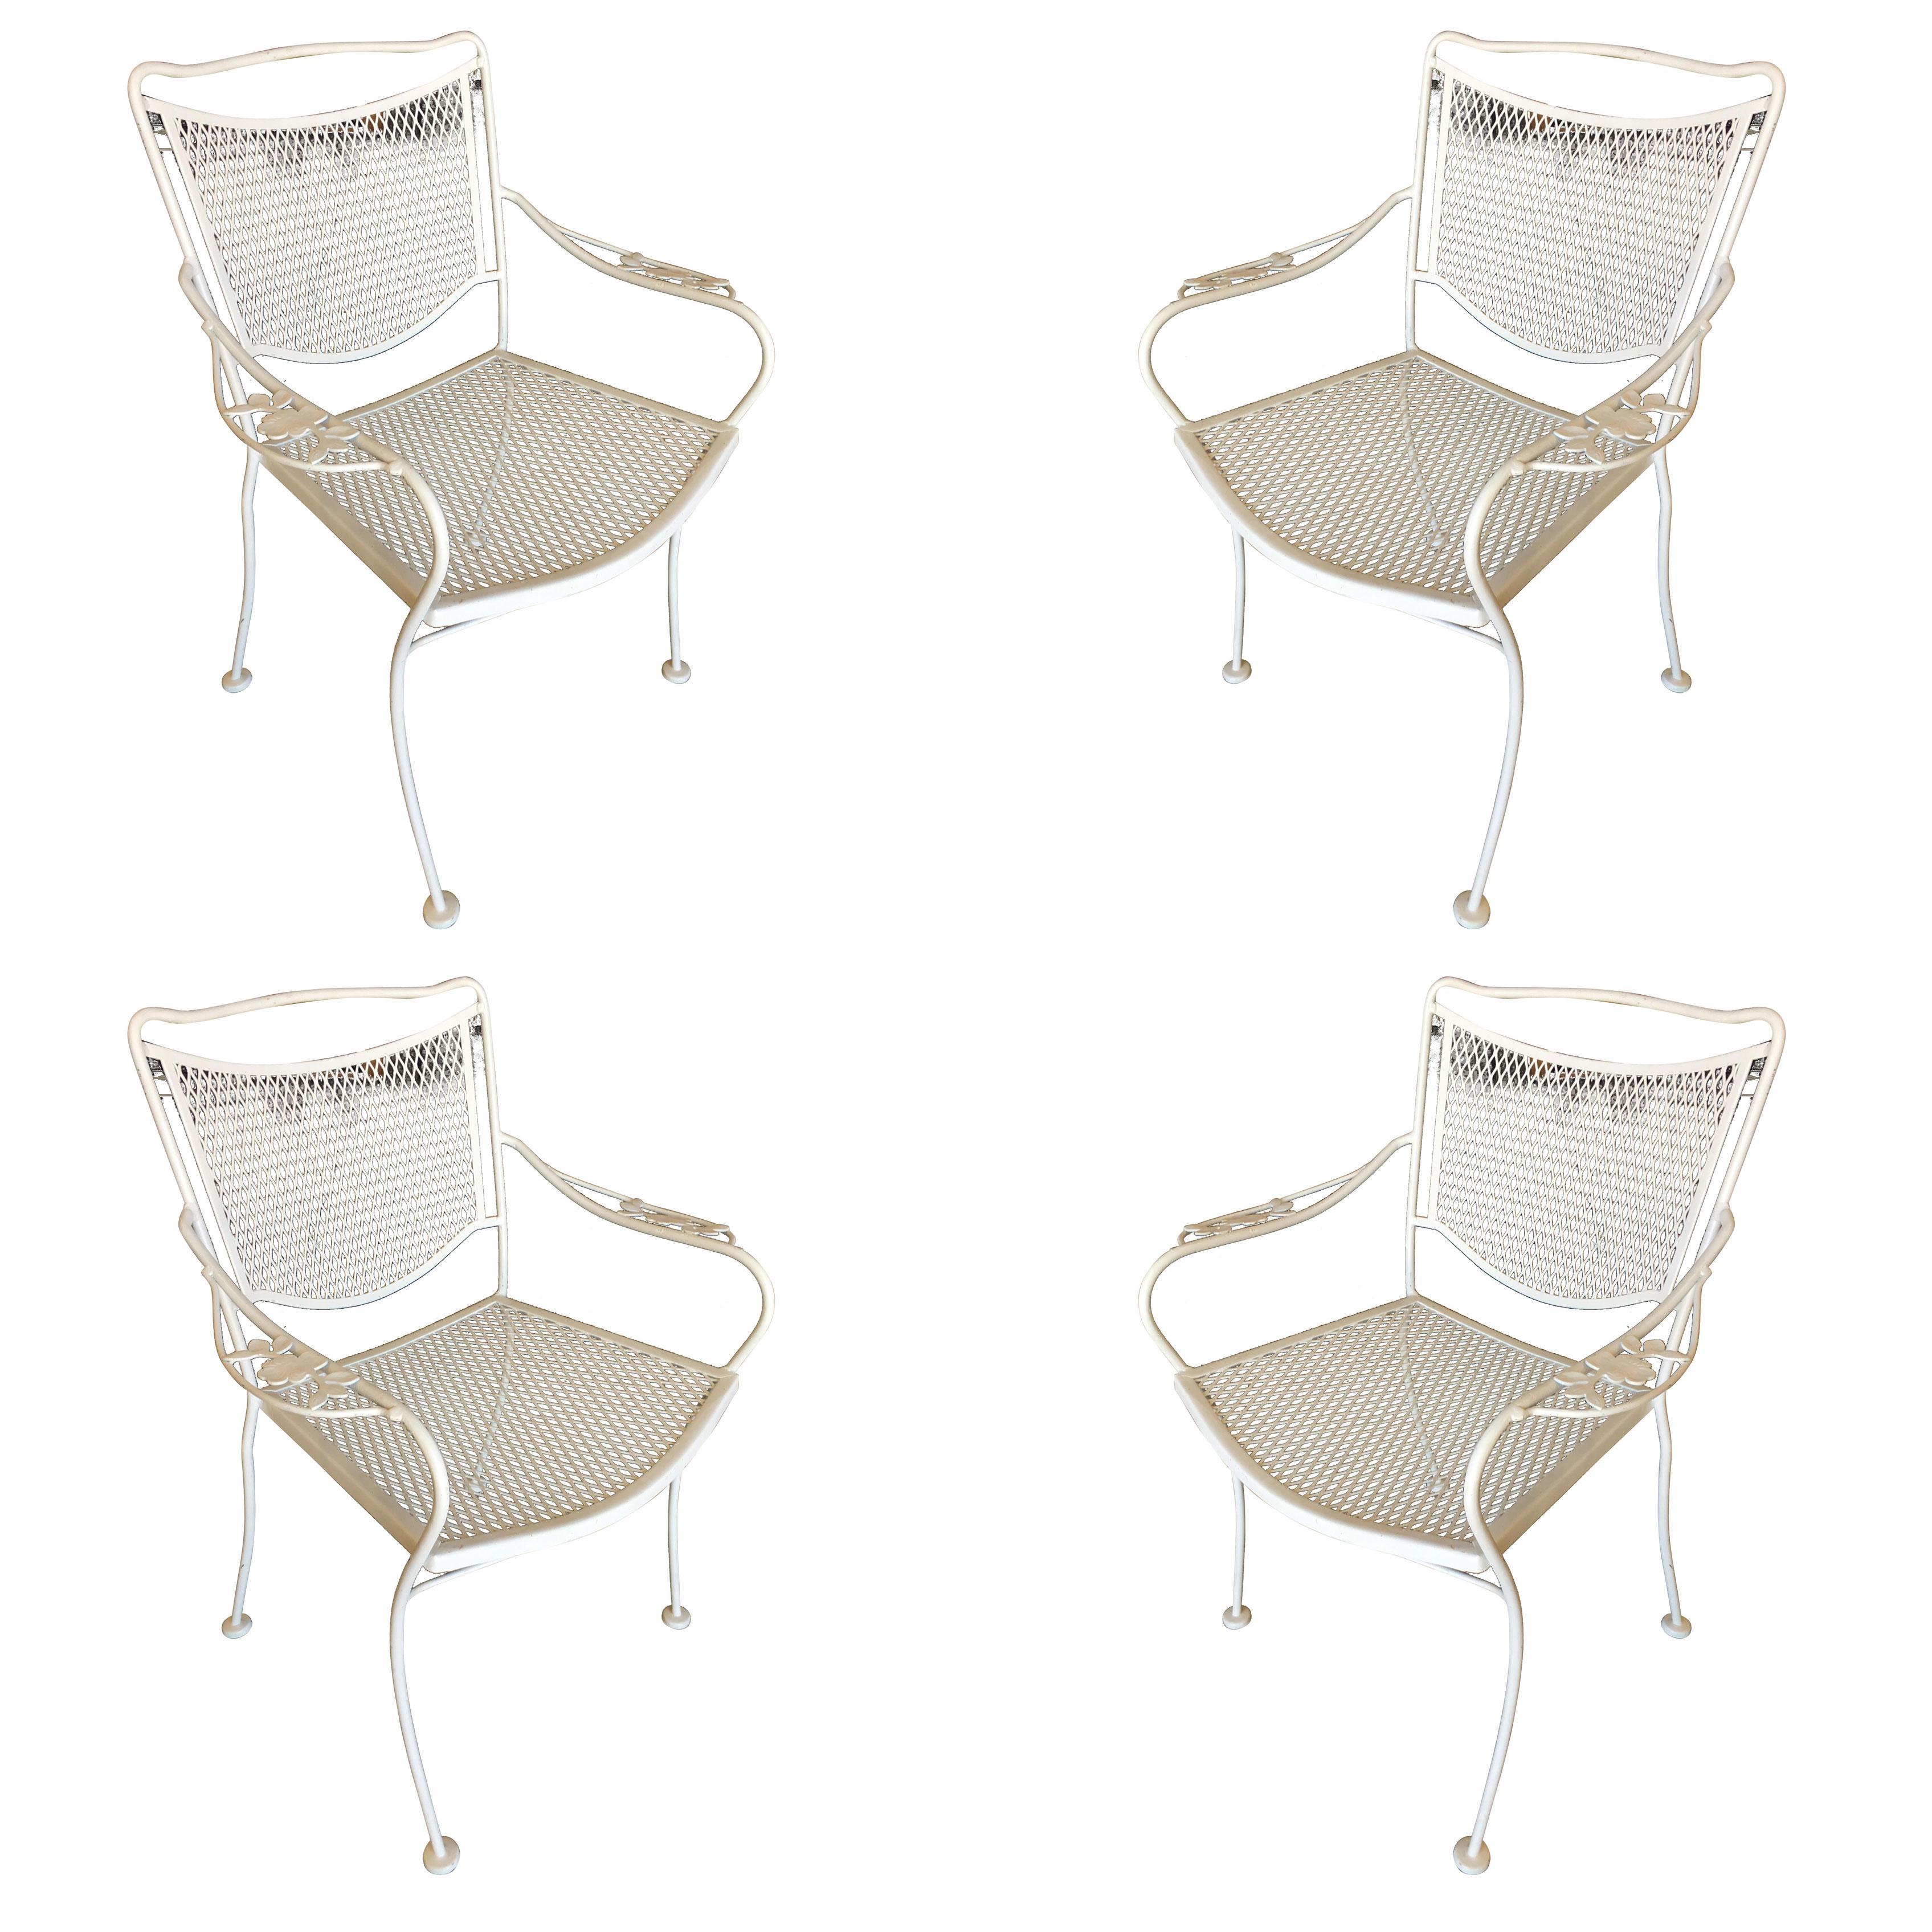 Set of four Russell Woodard designed wireframe outdoor patio chairs with leaf pattern arms and mesh steel seats. Please inquire us if you would like a different quantity of chairs. More are available upon request. All outdoor furniture can be